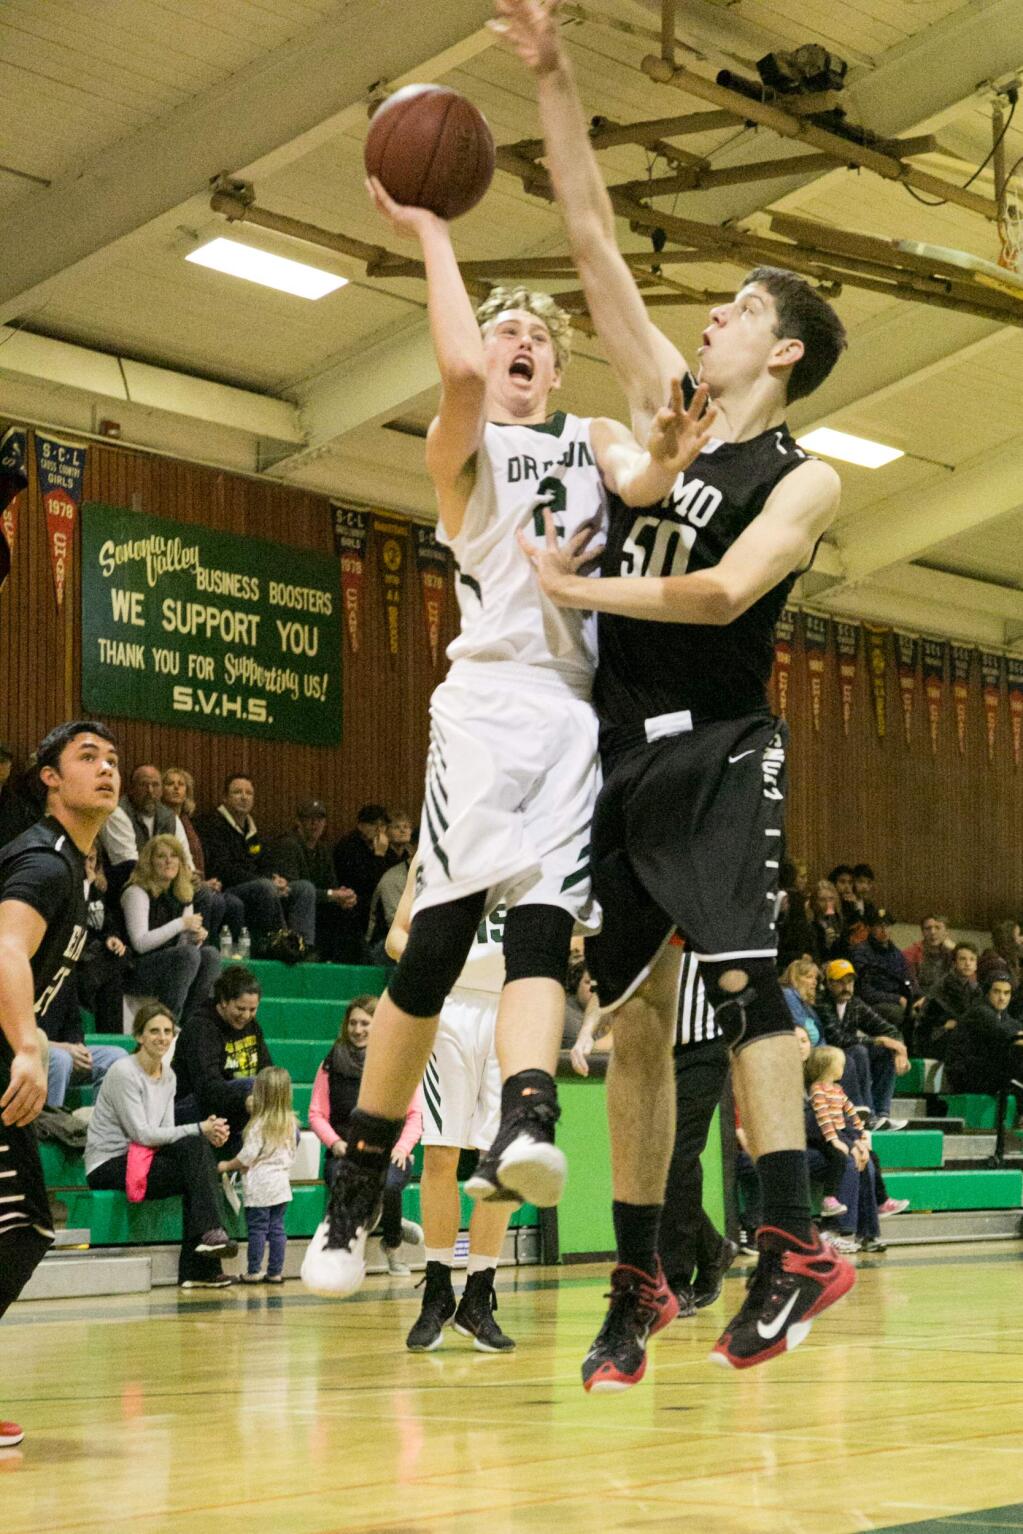 Sonoma's 6-foot 3-inch junior Luke Severson scores first basket against El Molino's 6-foot 7-inch senior Jordan Kireviet. Sonoma led all the way in this home game, won by the Dragons 43-26, Friday night, Feb. 5, 2016. (Photo by Julie Vader/Special to the Index-Tribune)